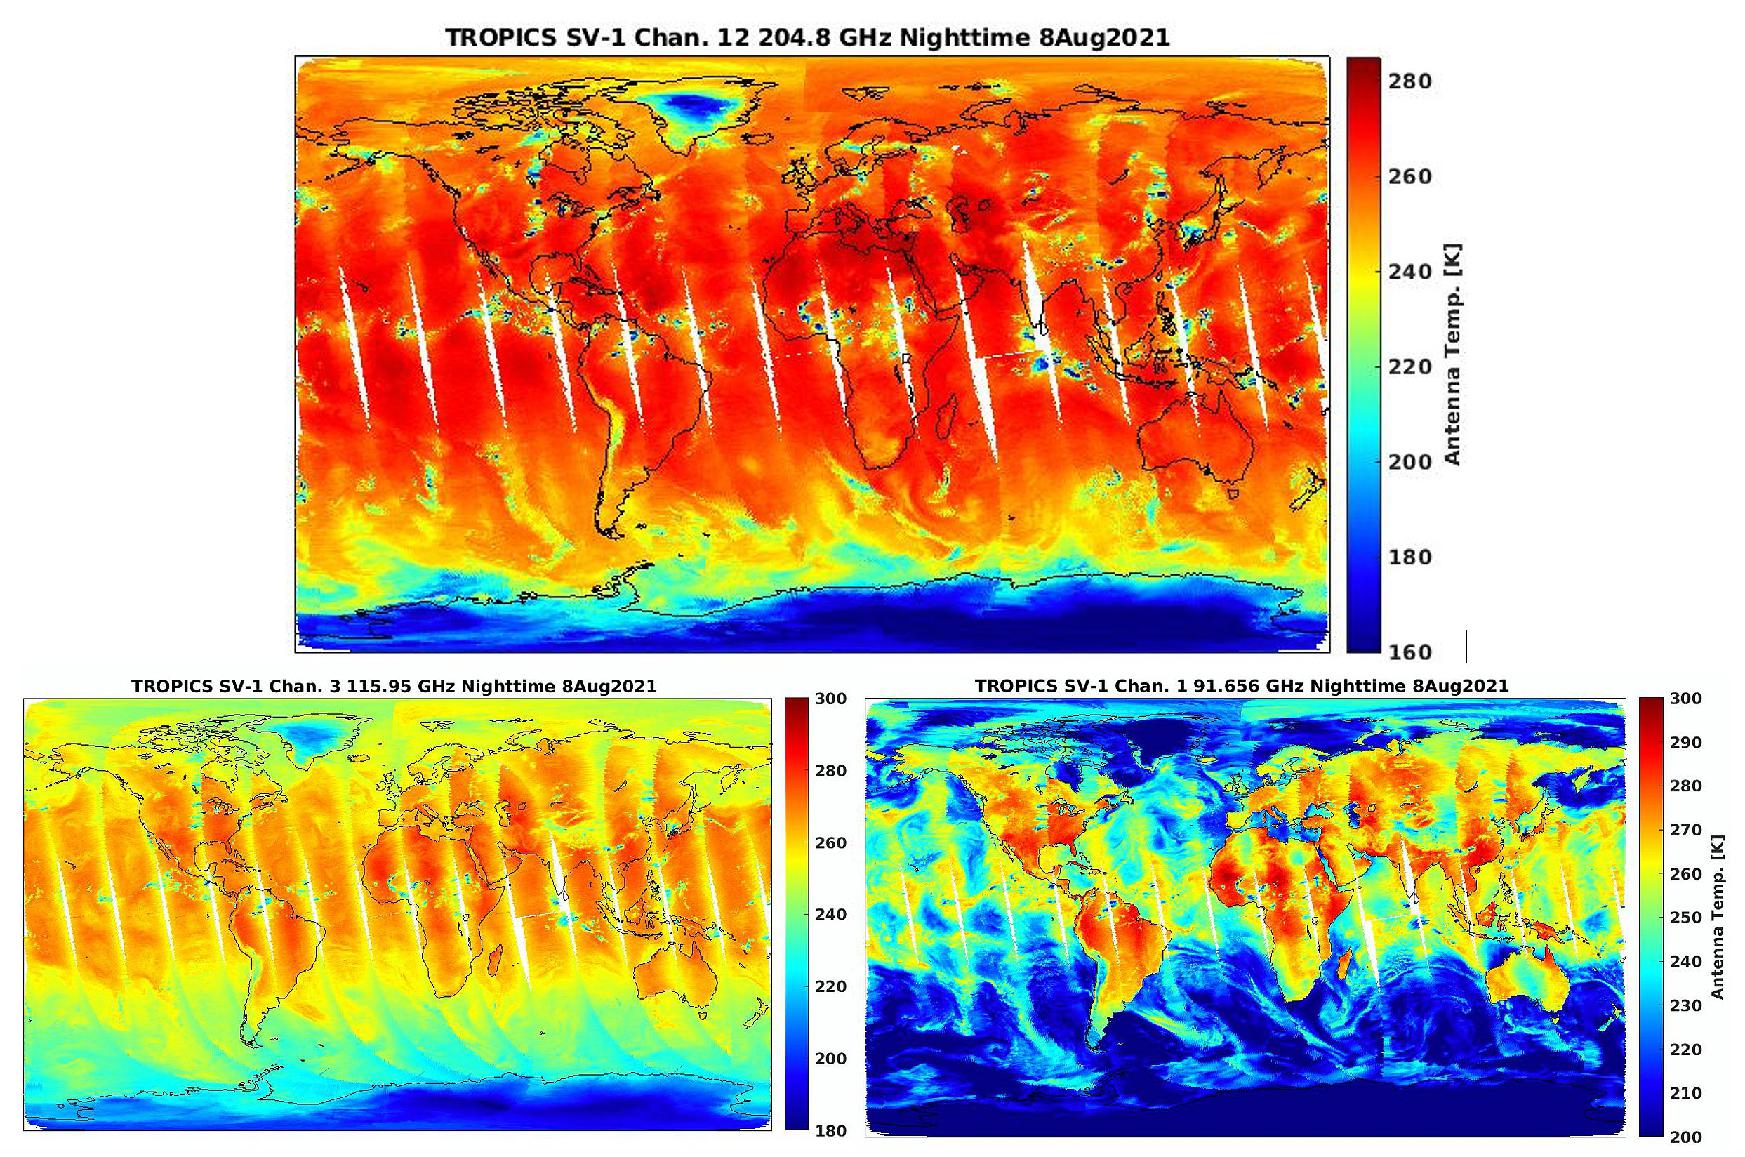 Figure 6: The TROPICS Pathfinder satellite captured its first global data on August 8, 2021, including a channel around 205 GHz (top). It's the first time a frequency higher than 190 GHz has been used on a spaceborne microwave cross-track sounder instrument, which collects temperature and water vapor data using microwave radiance observations (image credits: NASA / TROPICS Pathfinder satellite)